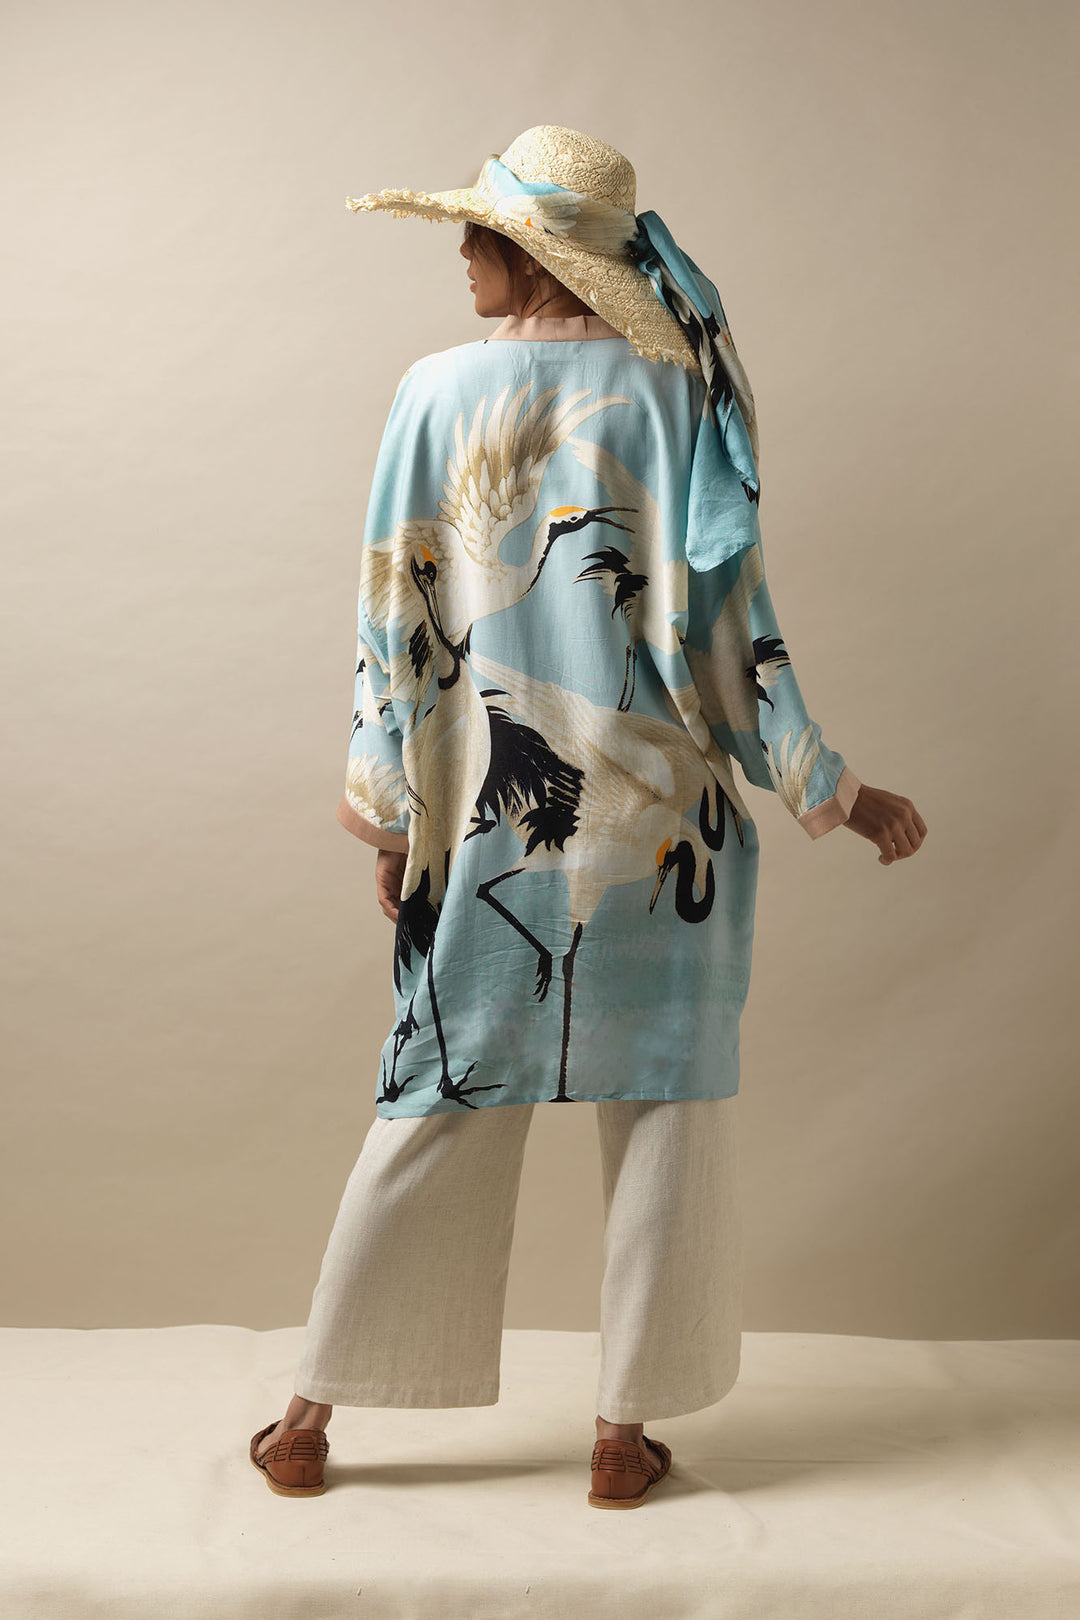 The One Hundred Stars Stork Sky Blue Collar Kimono is the perfect holiday cover up. adding a stylish twist to linen trousers and woven sandals. The Stork Sky Blue Scarf can also be tied around your hat to bring your whole outfit together. 